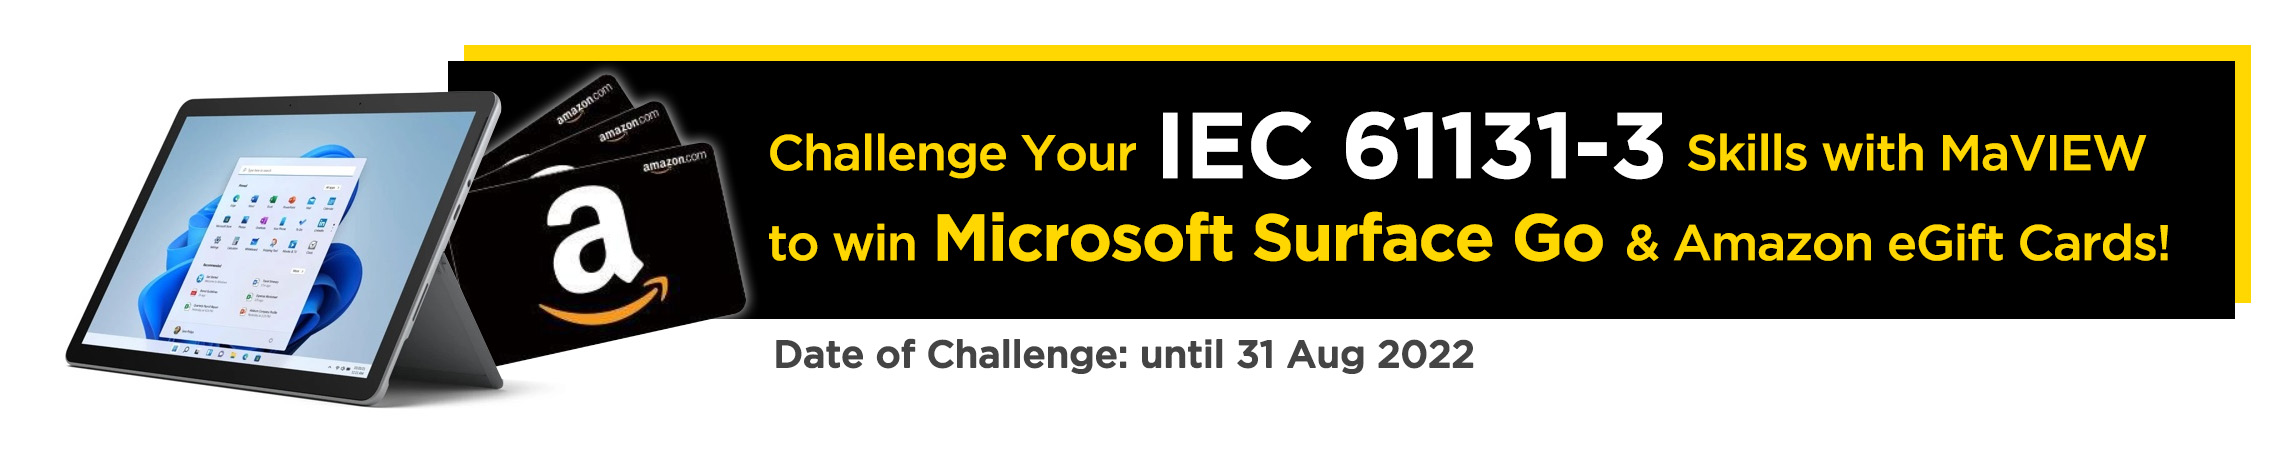 Challenge IEC 61131-3 with MaVIEW and Win Prizes 